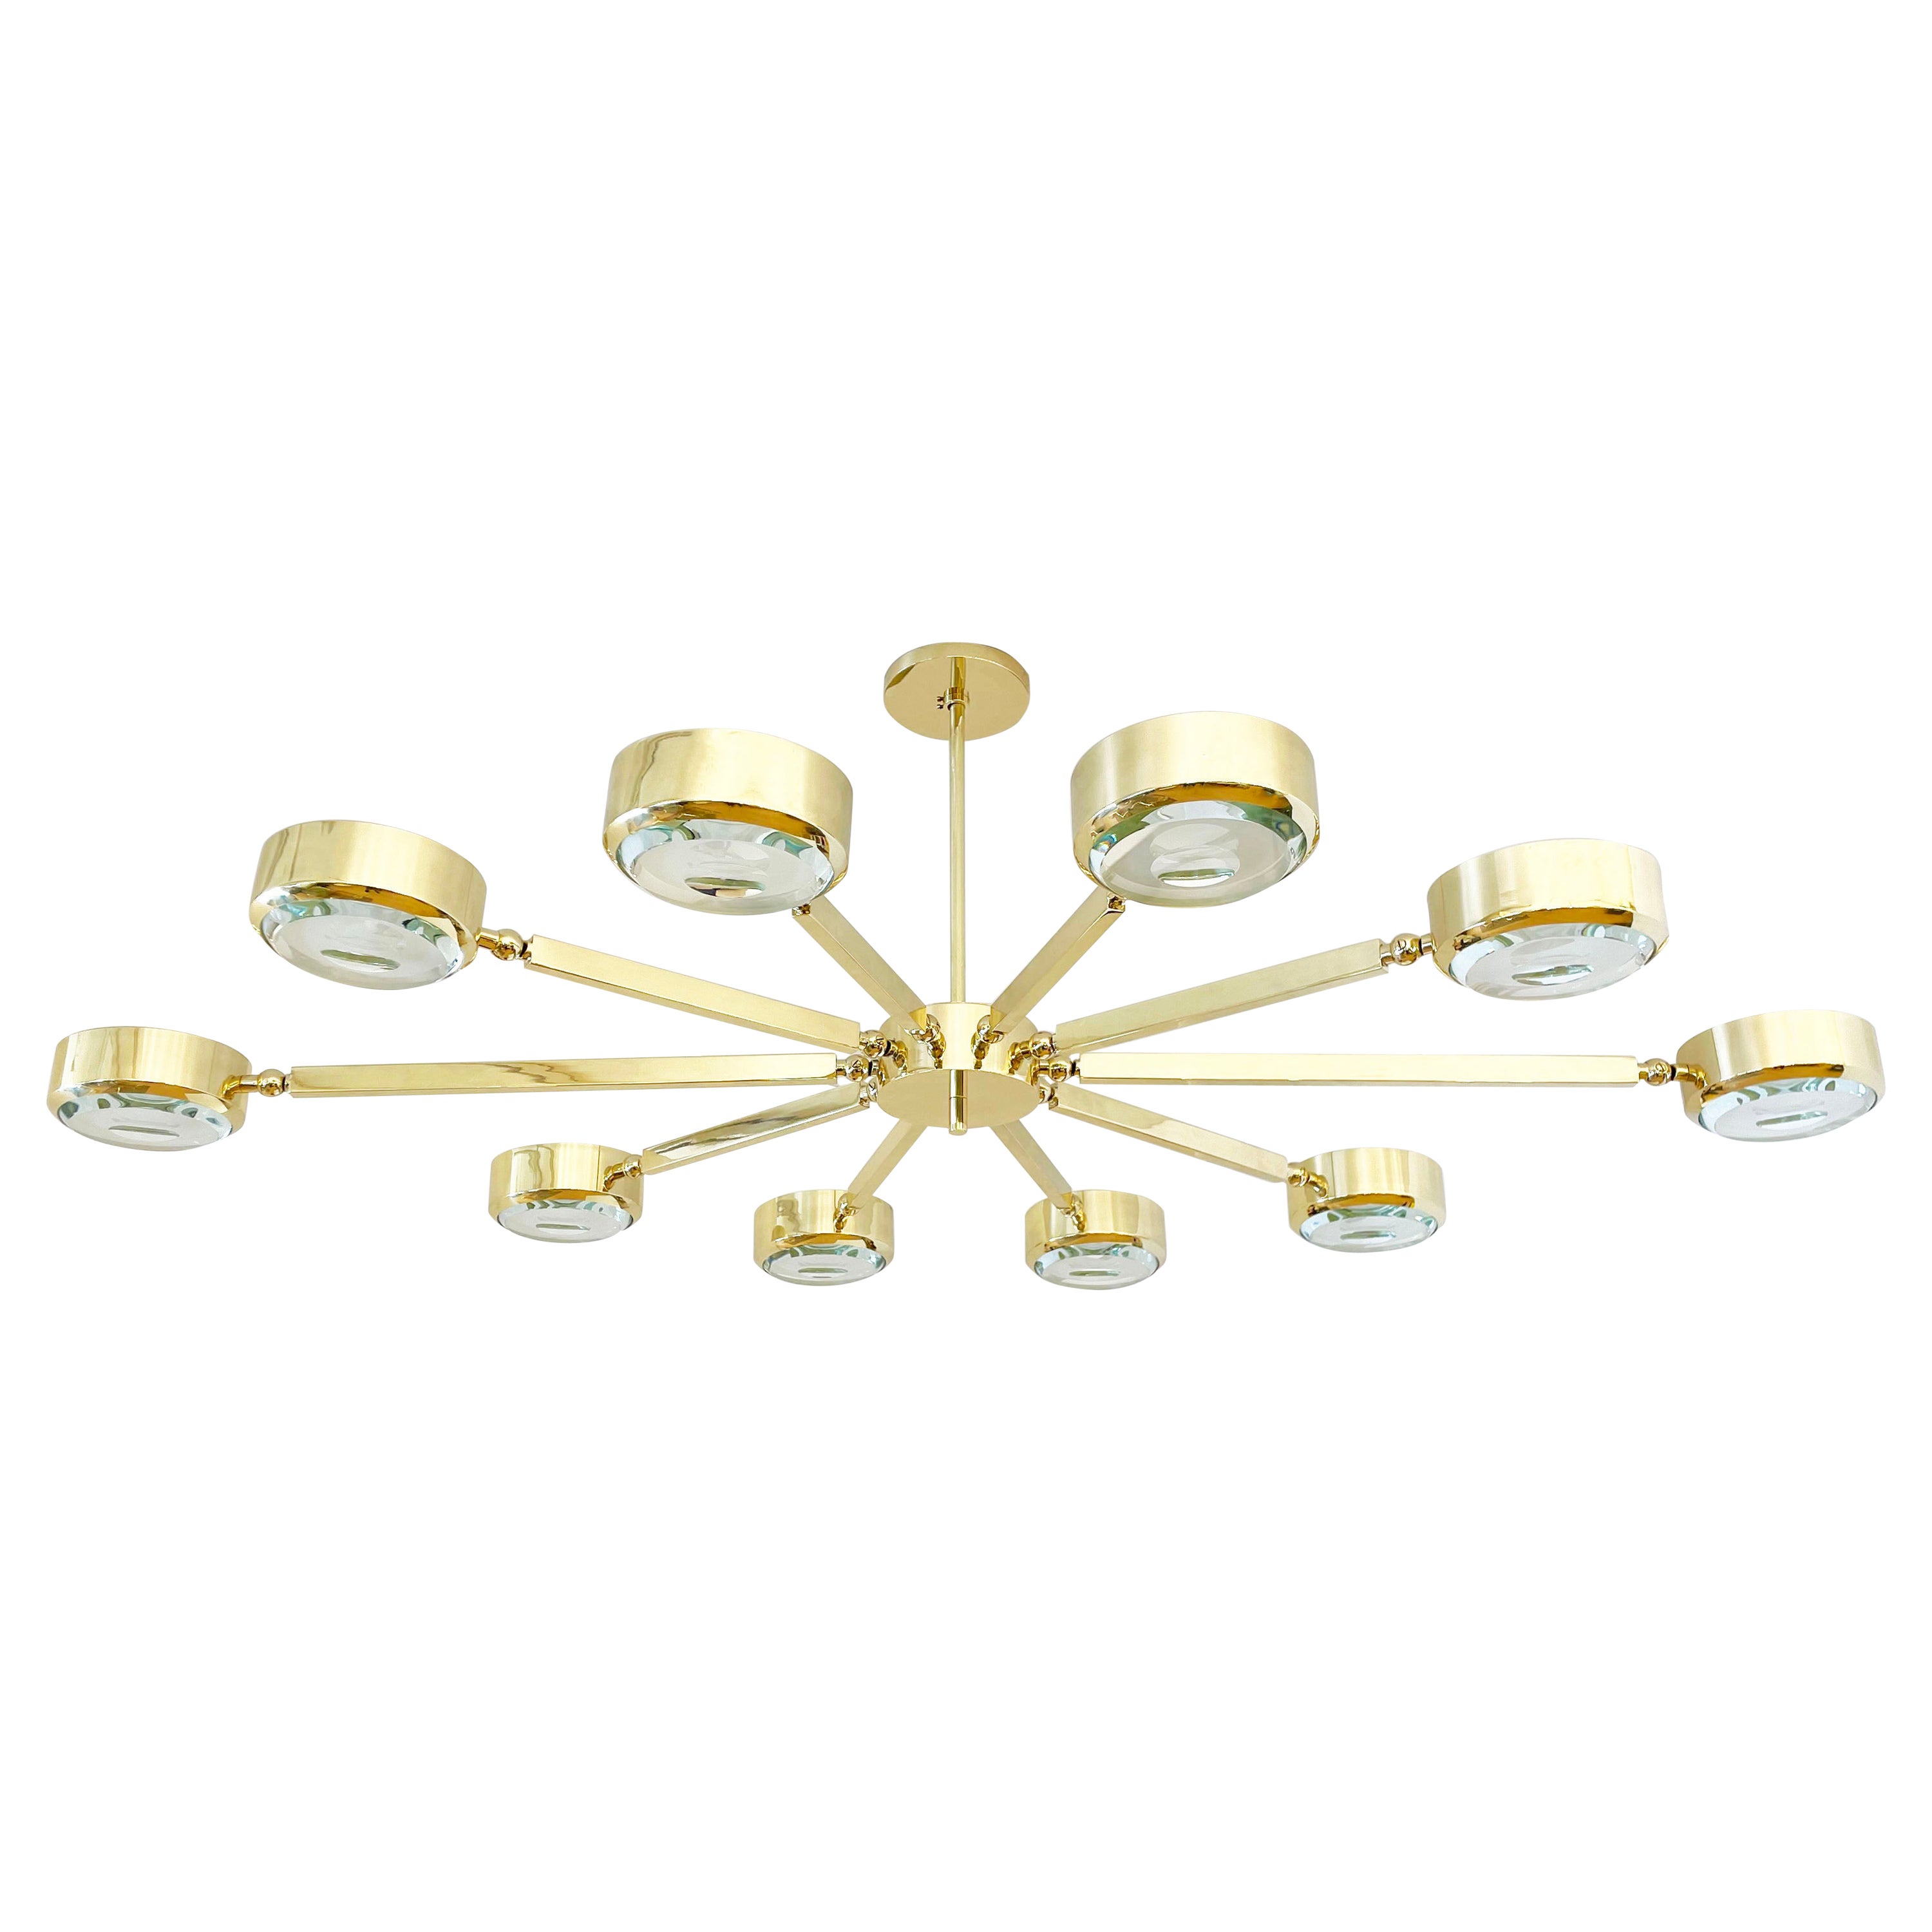 Oculus Oval Ceiling Light by Gaspare Asaro- Polished Brass with Carved Glass For Sale